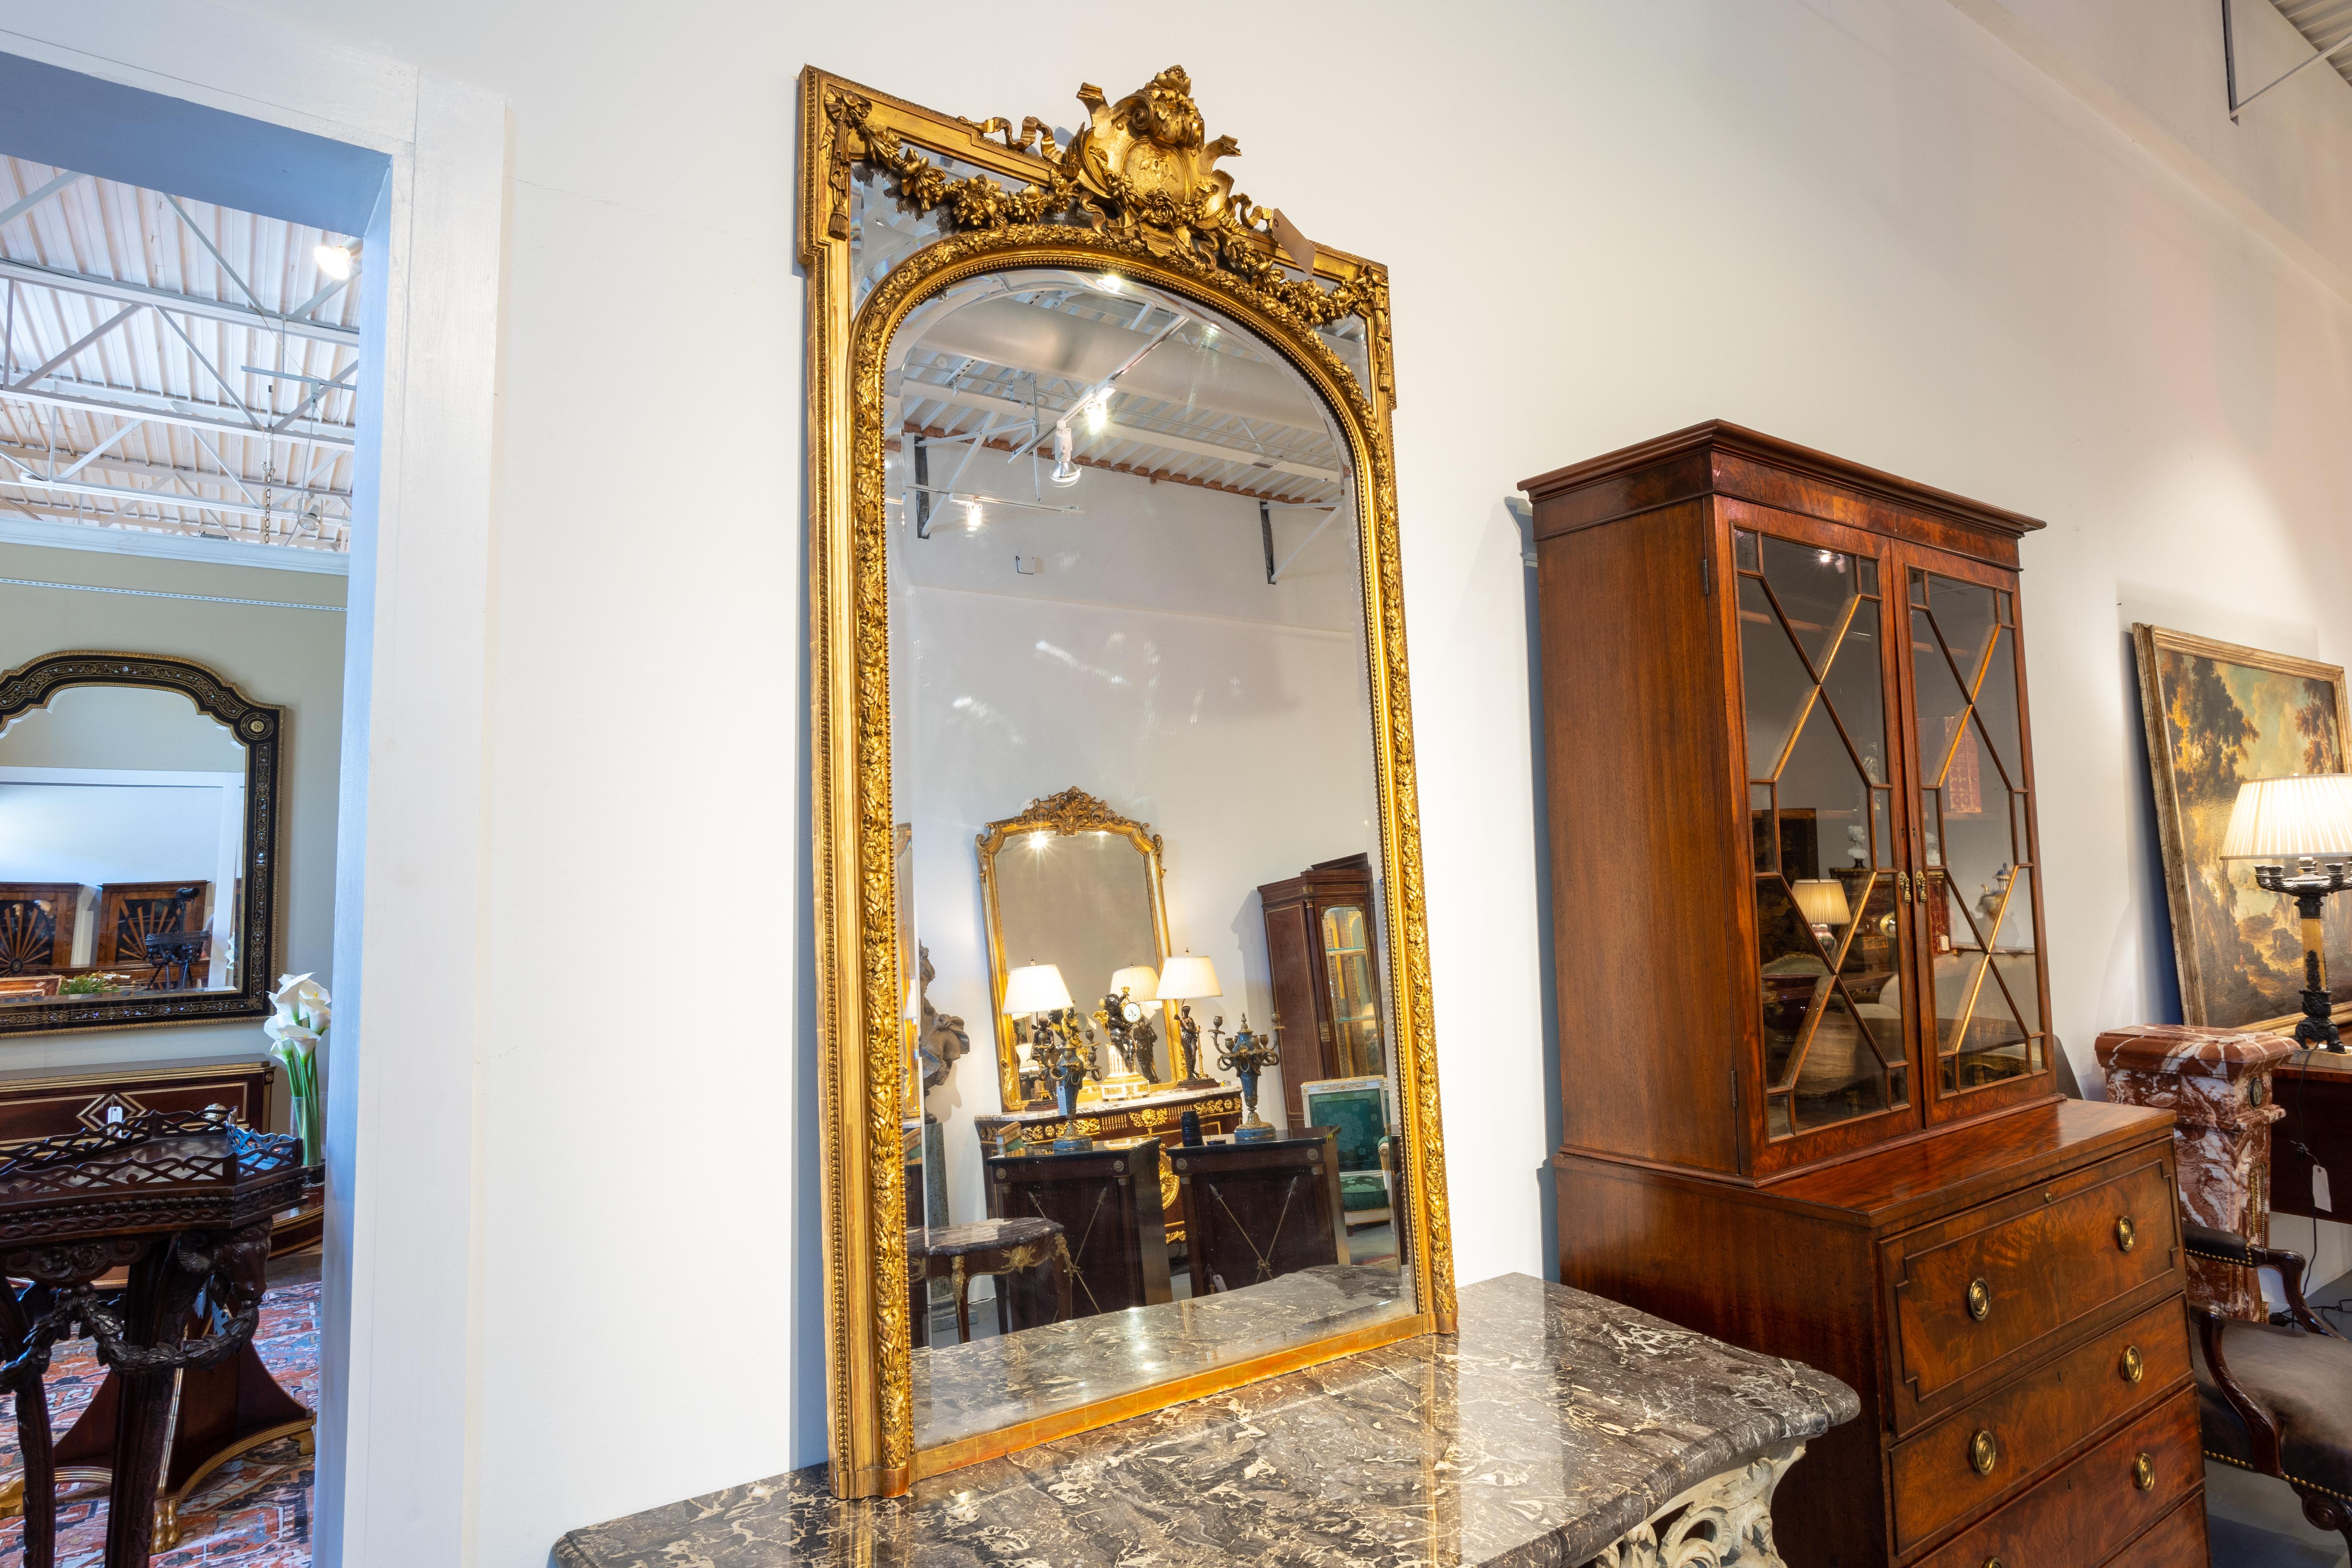 A very finely carved and gilt 19th century Louis XVI large mirror. Hand carved with water gilt highlights.